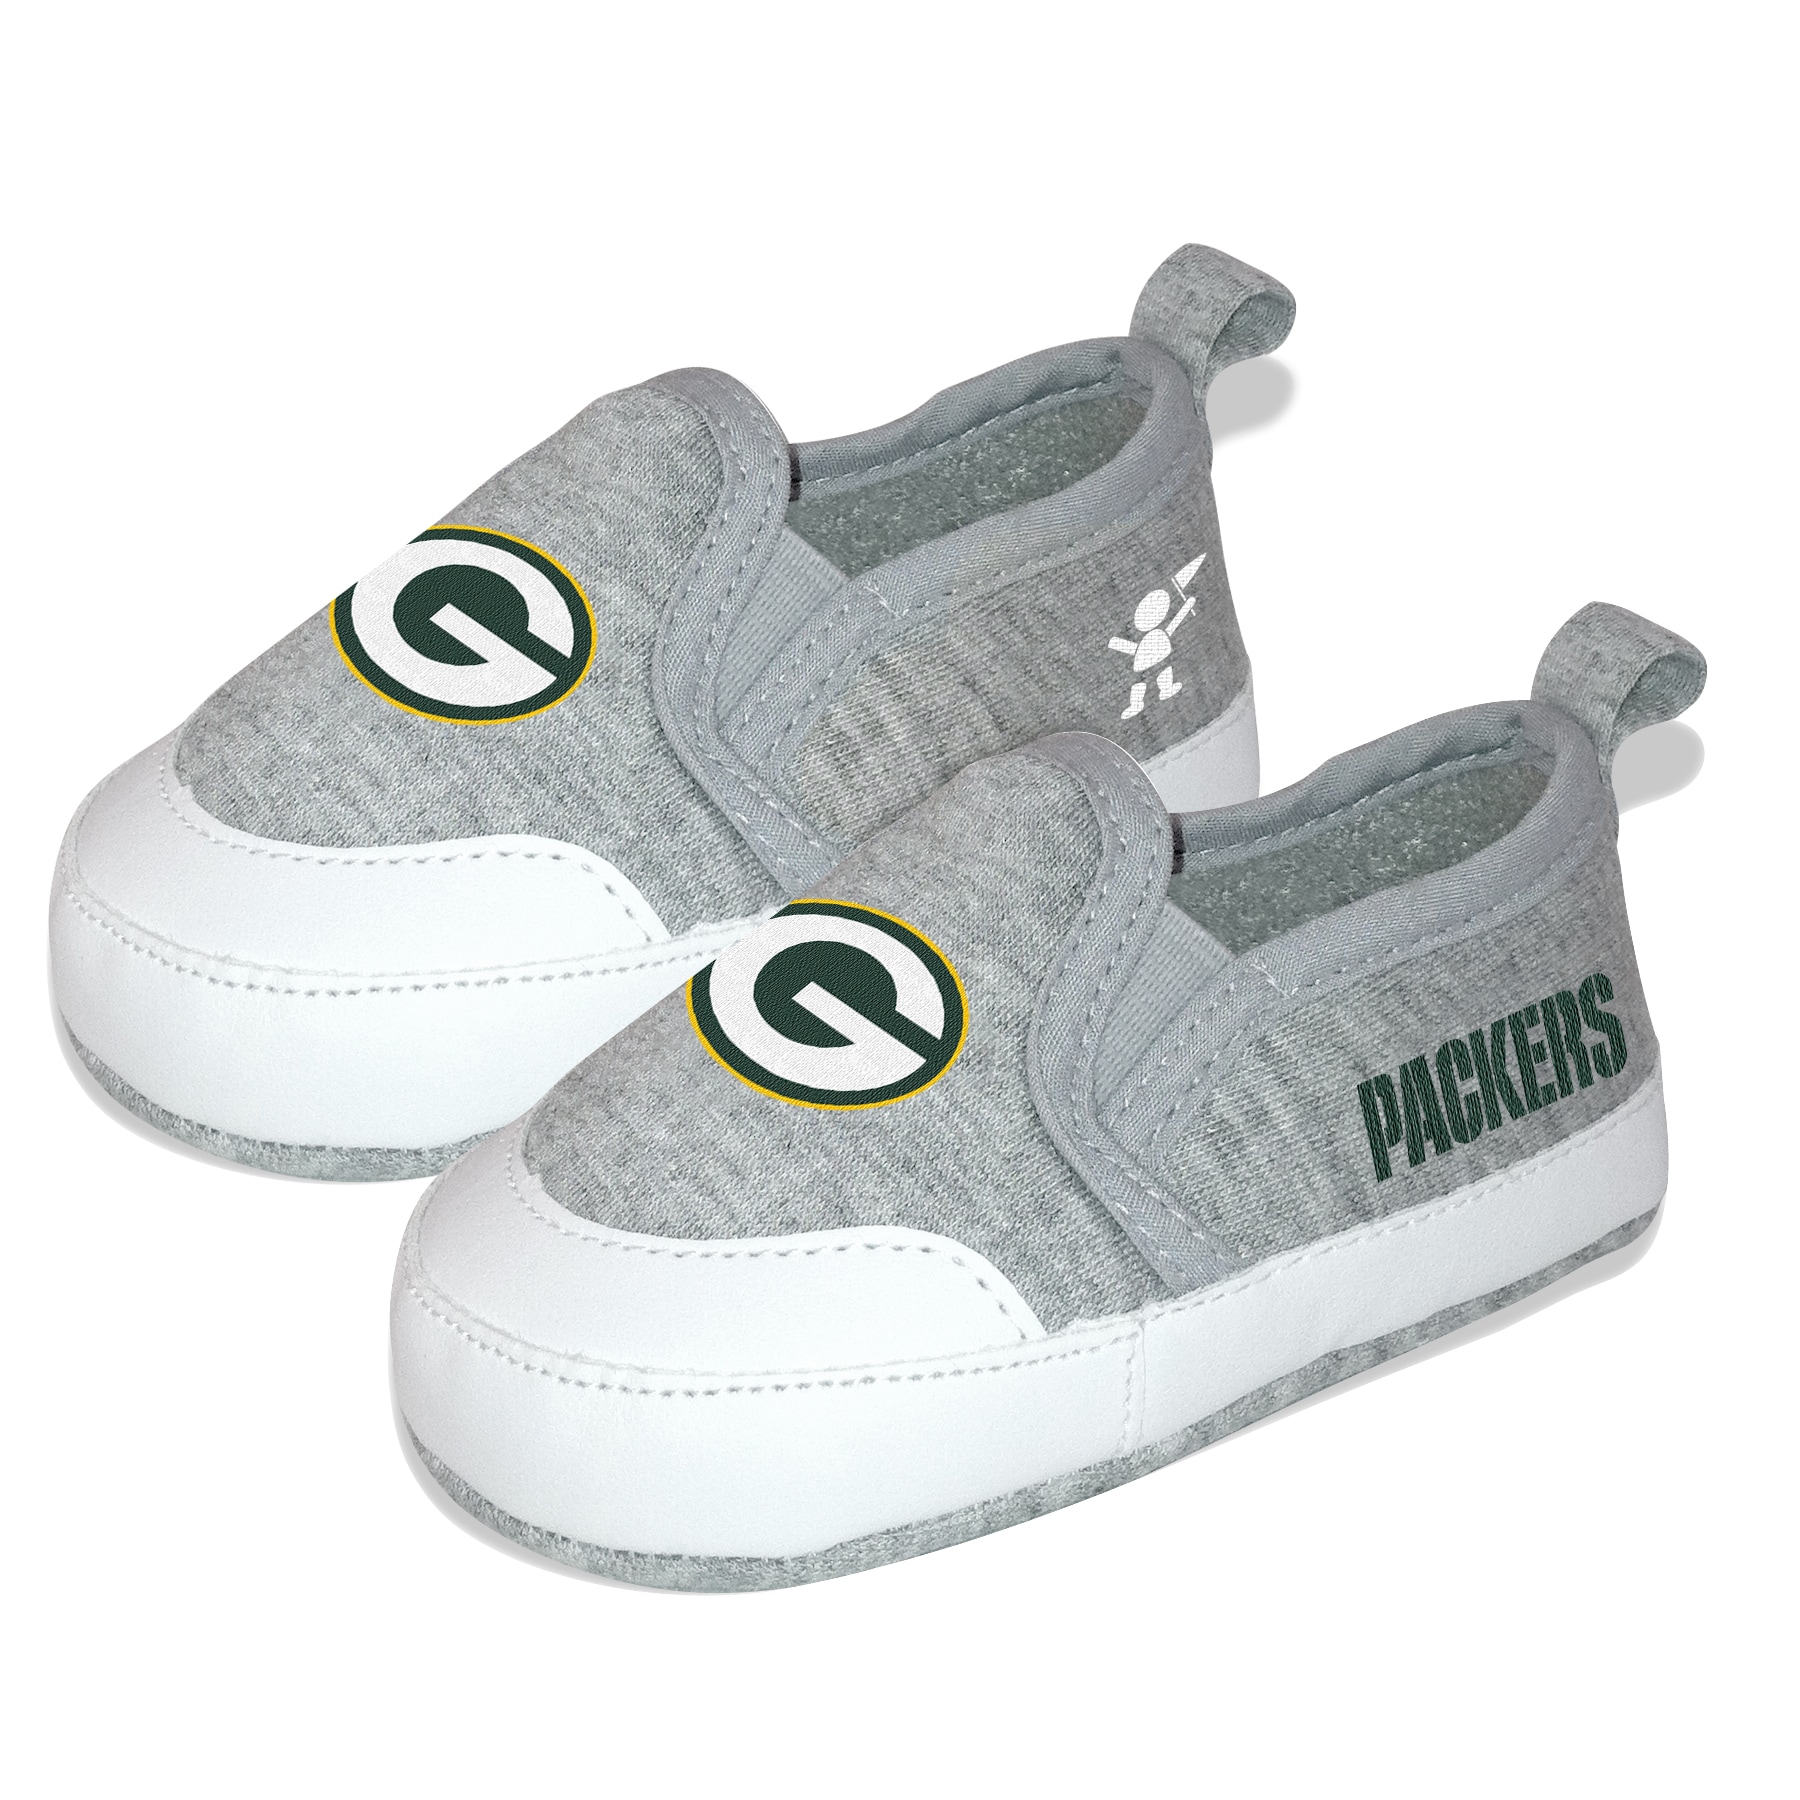 packer shoes